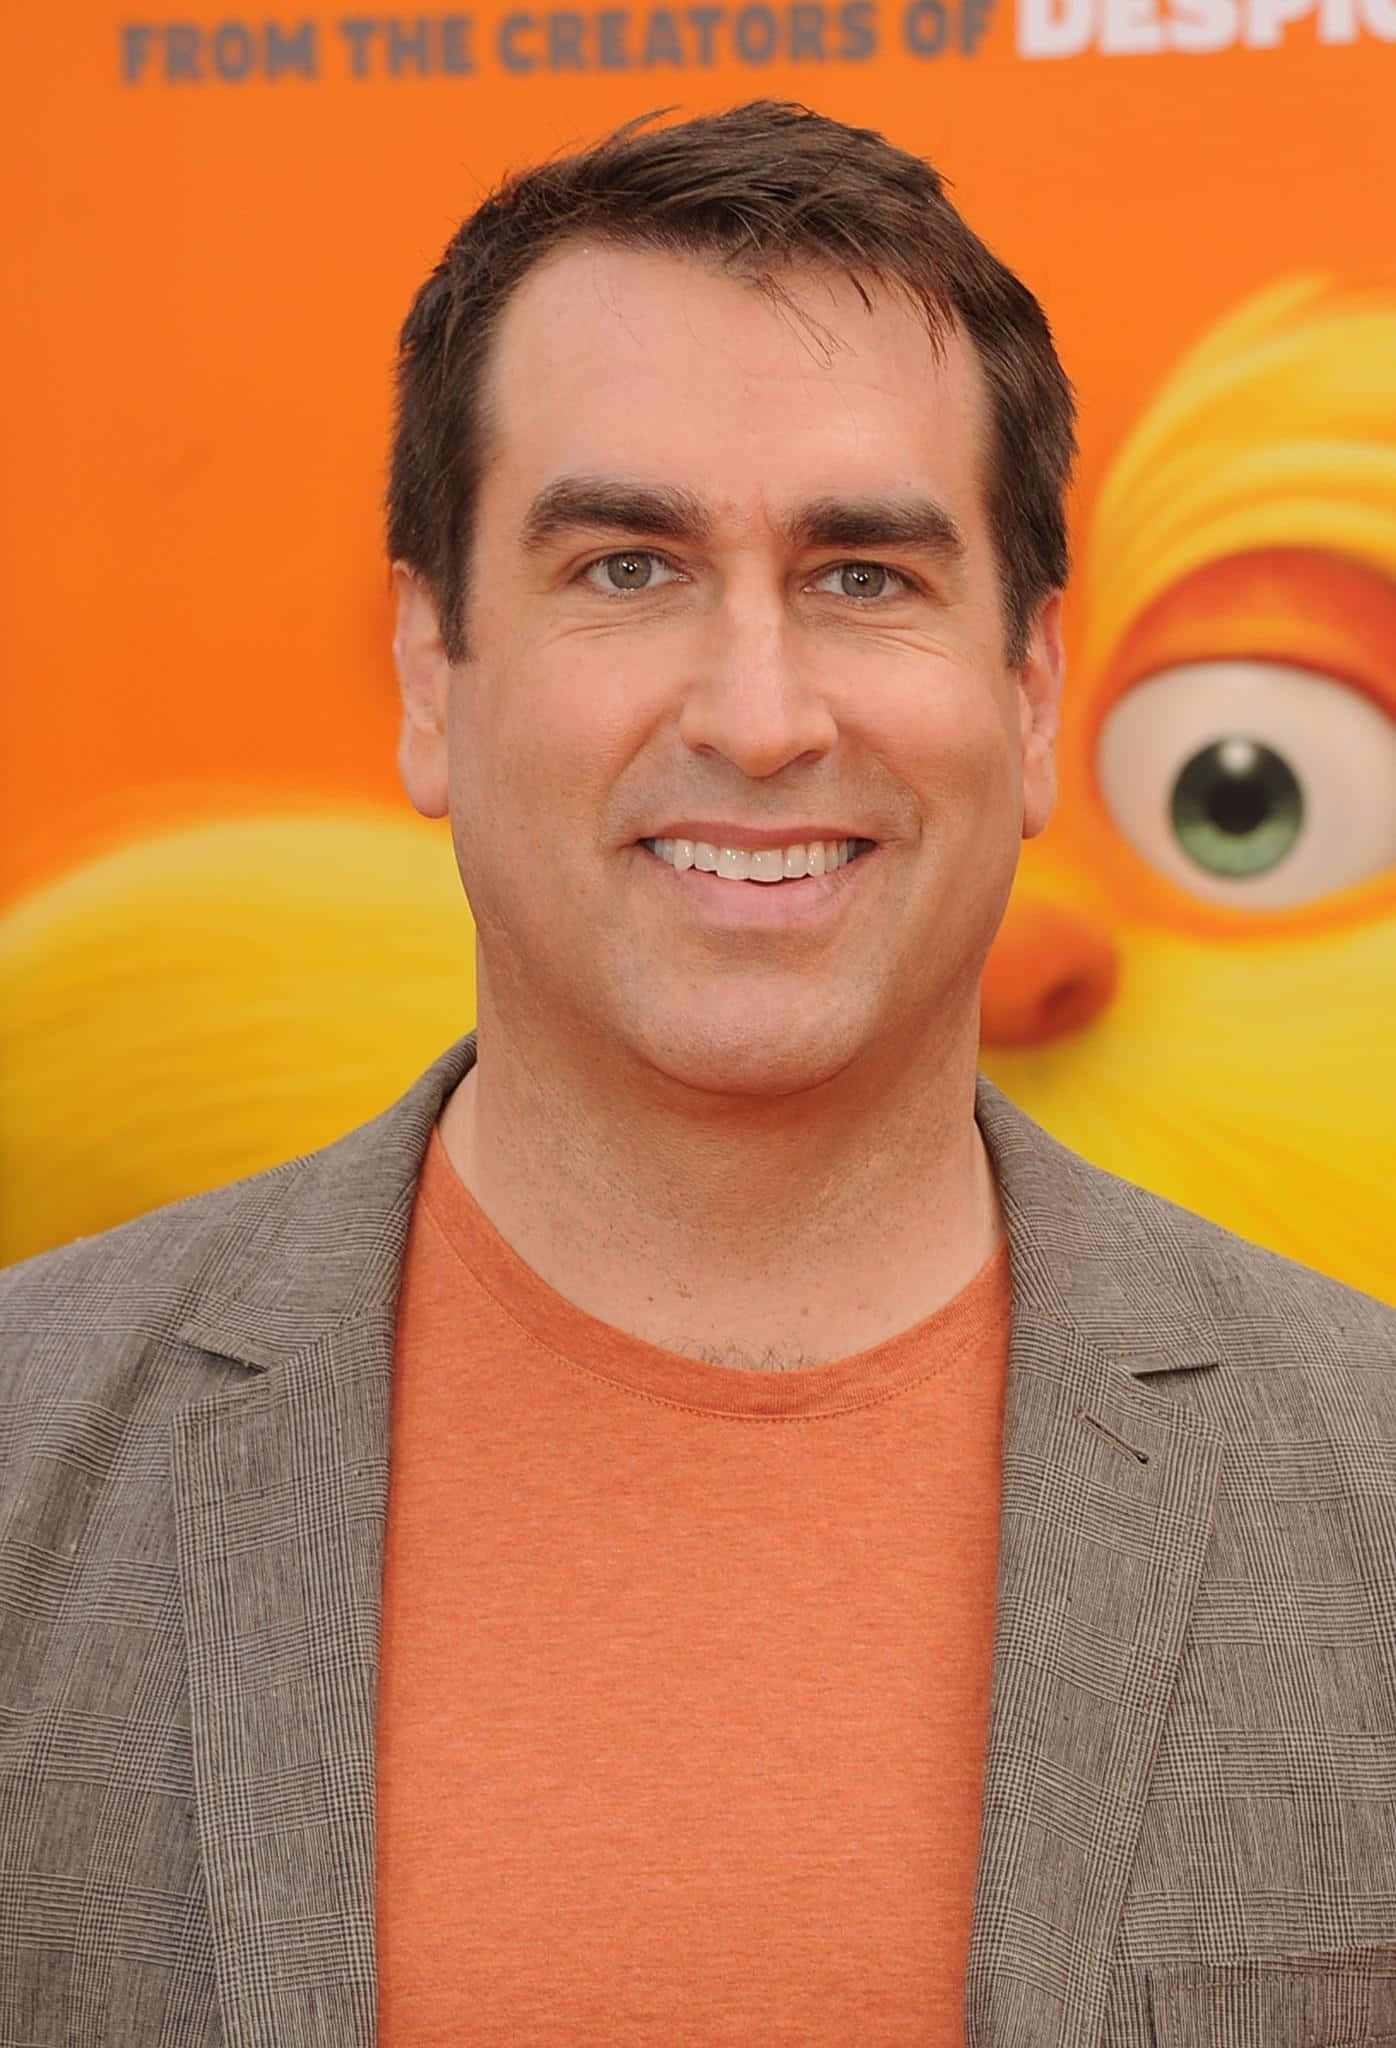 Actorrob Riggle Is Well Known For His Comedic Roles In Movies And Tv Shows. Fondo de pantalla